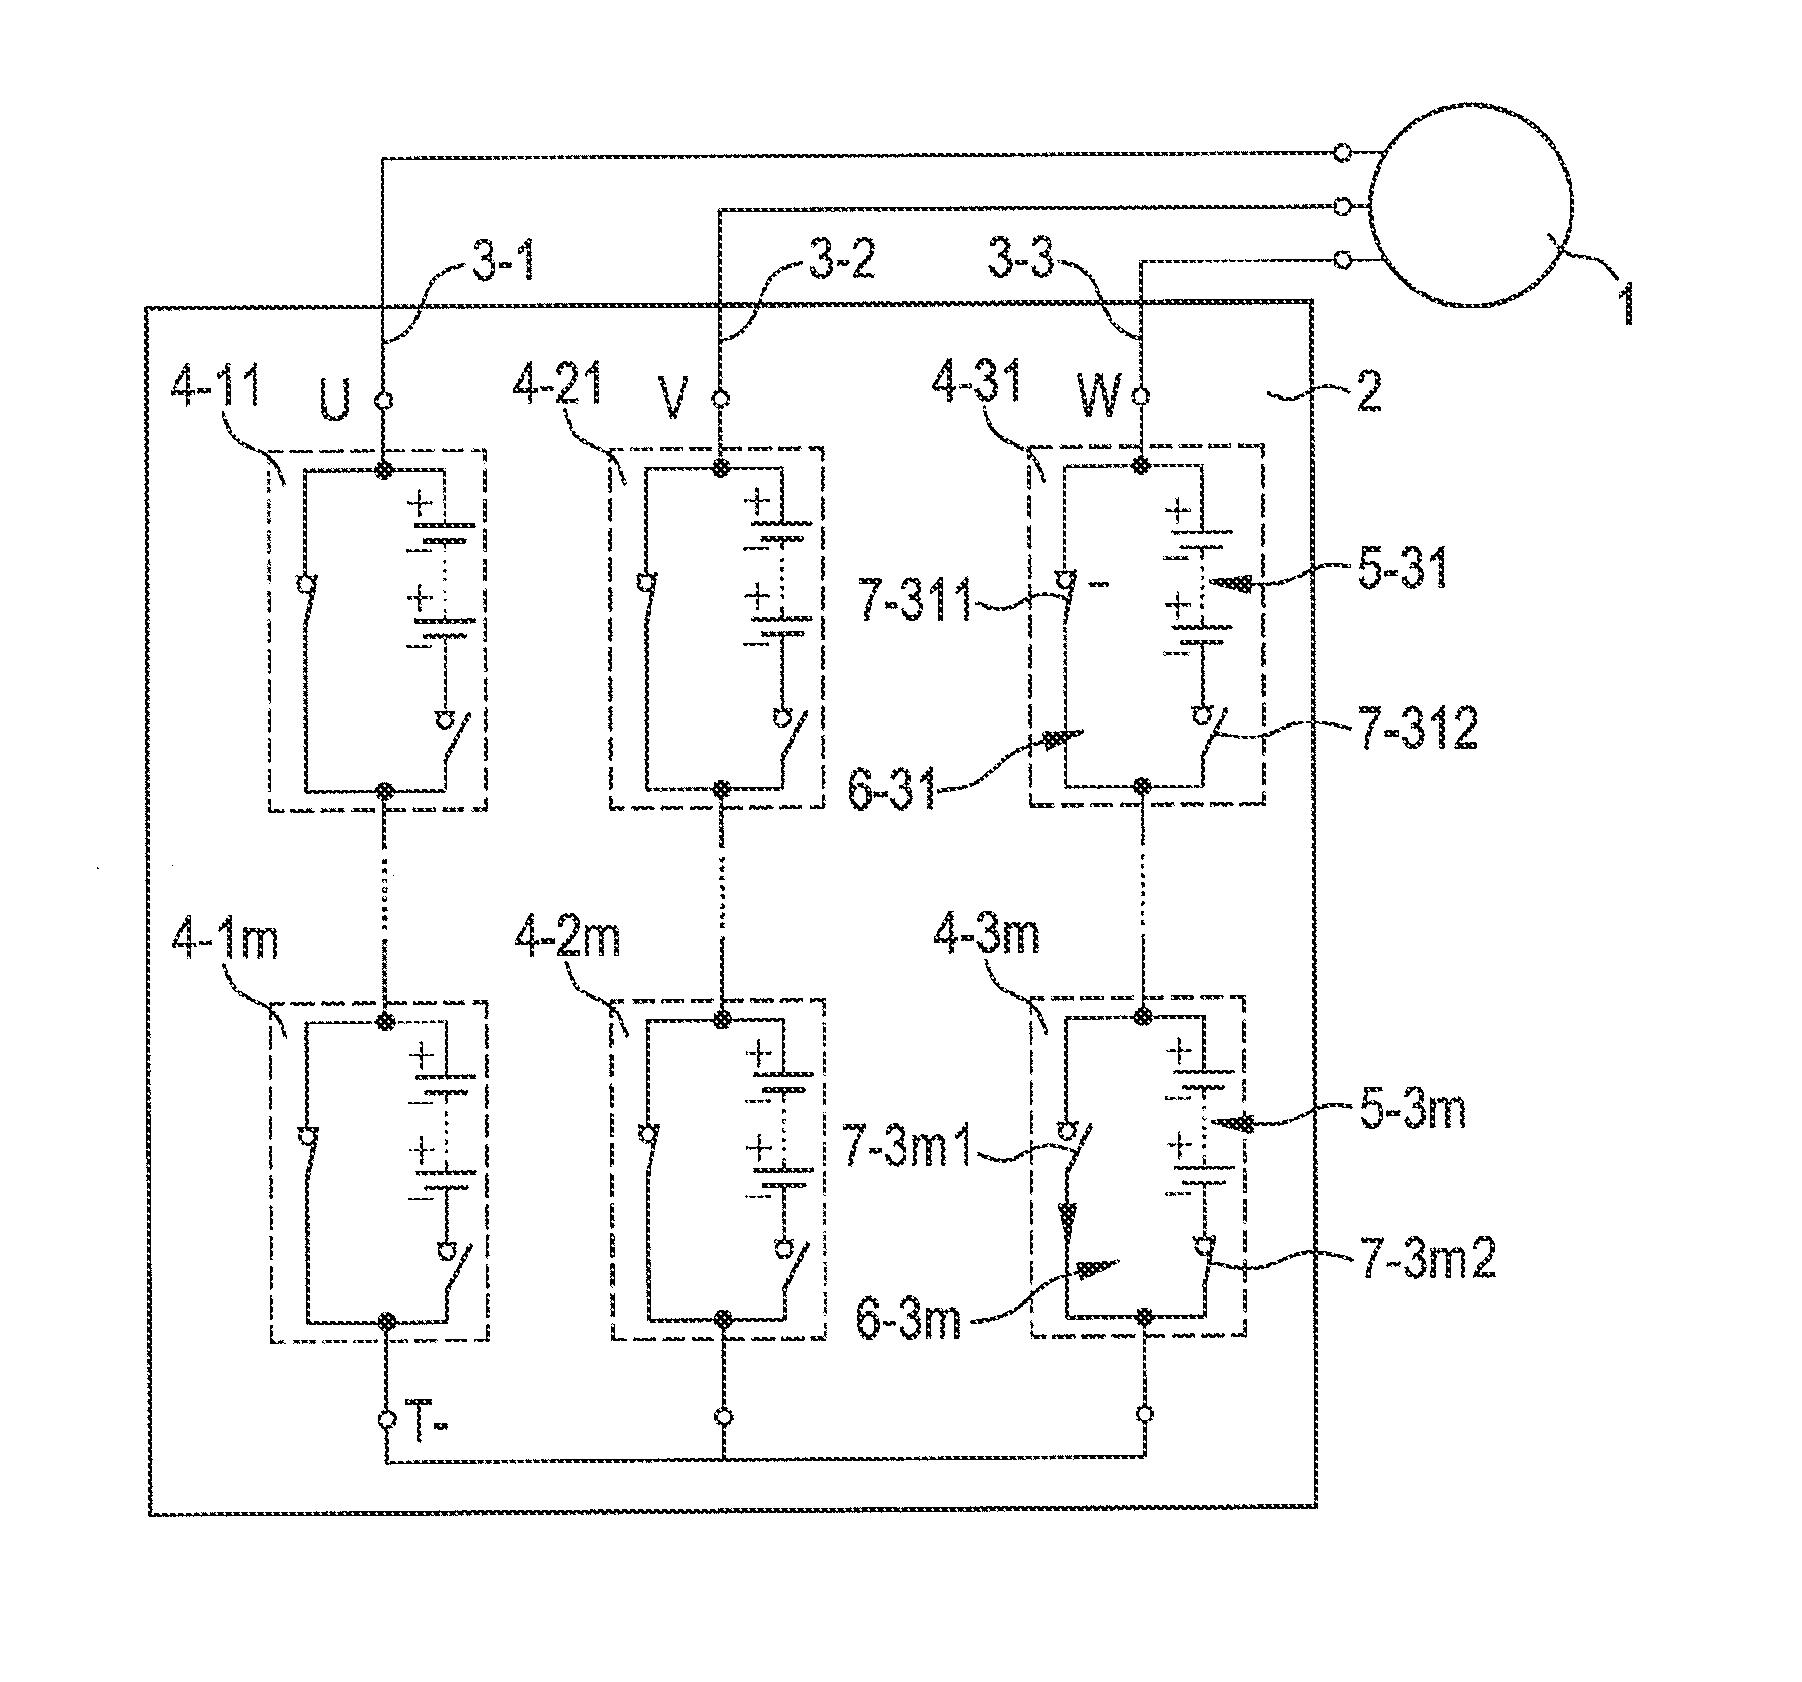 Method for setting a desired output voltage of a power supply branch of a controllable energy store